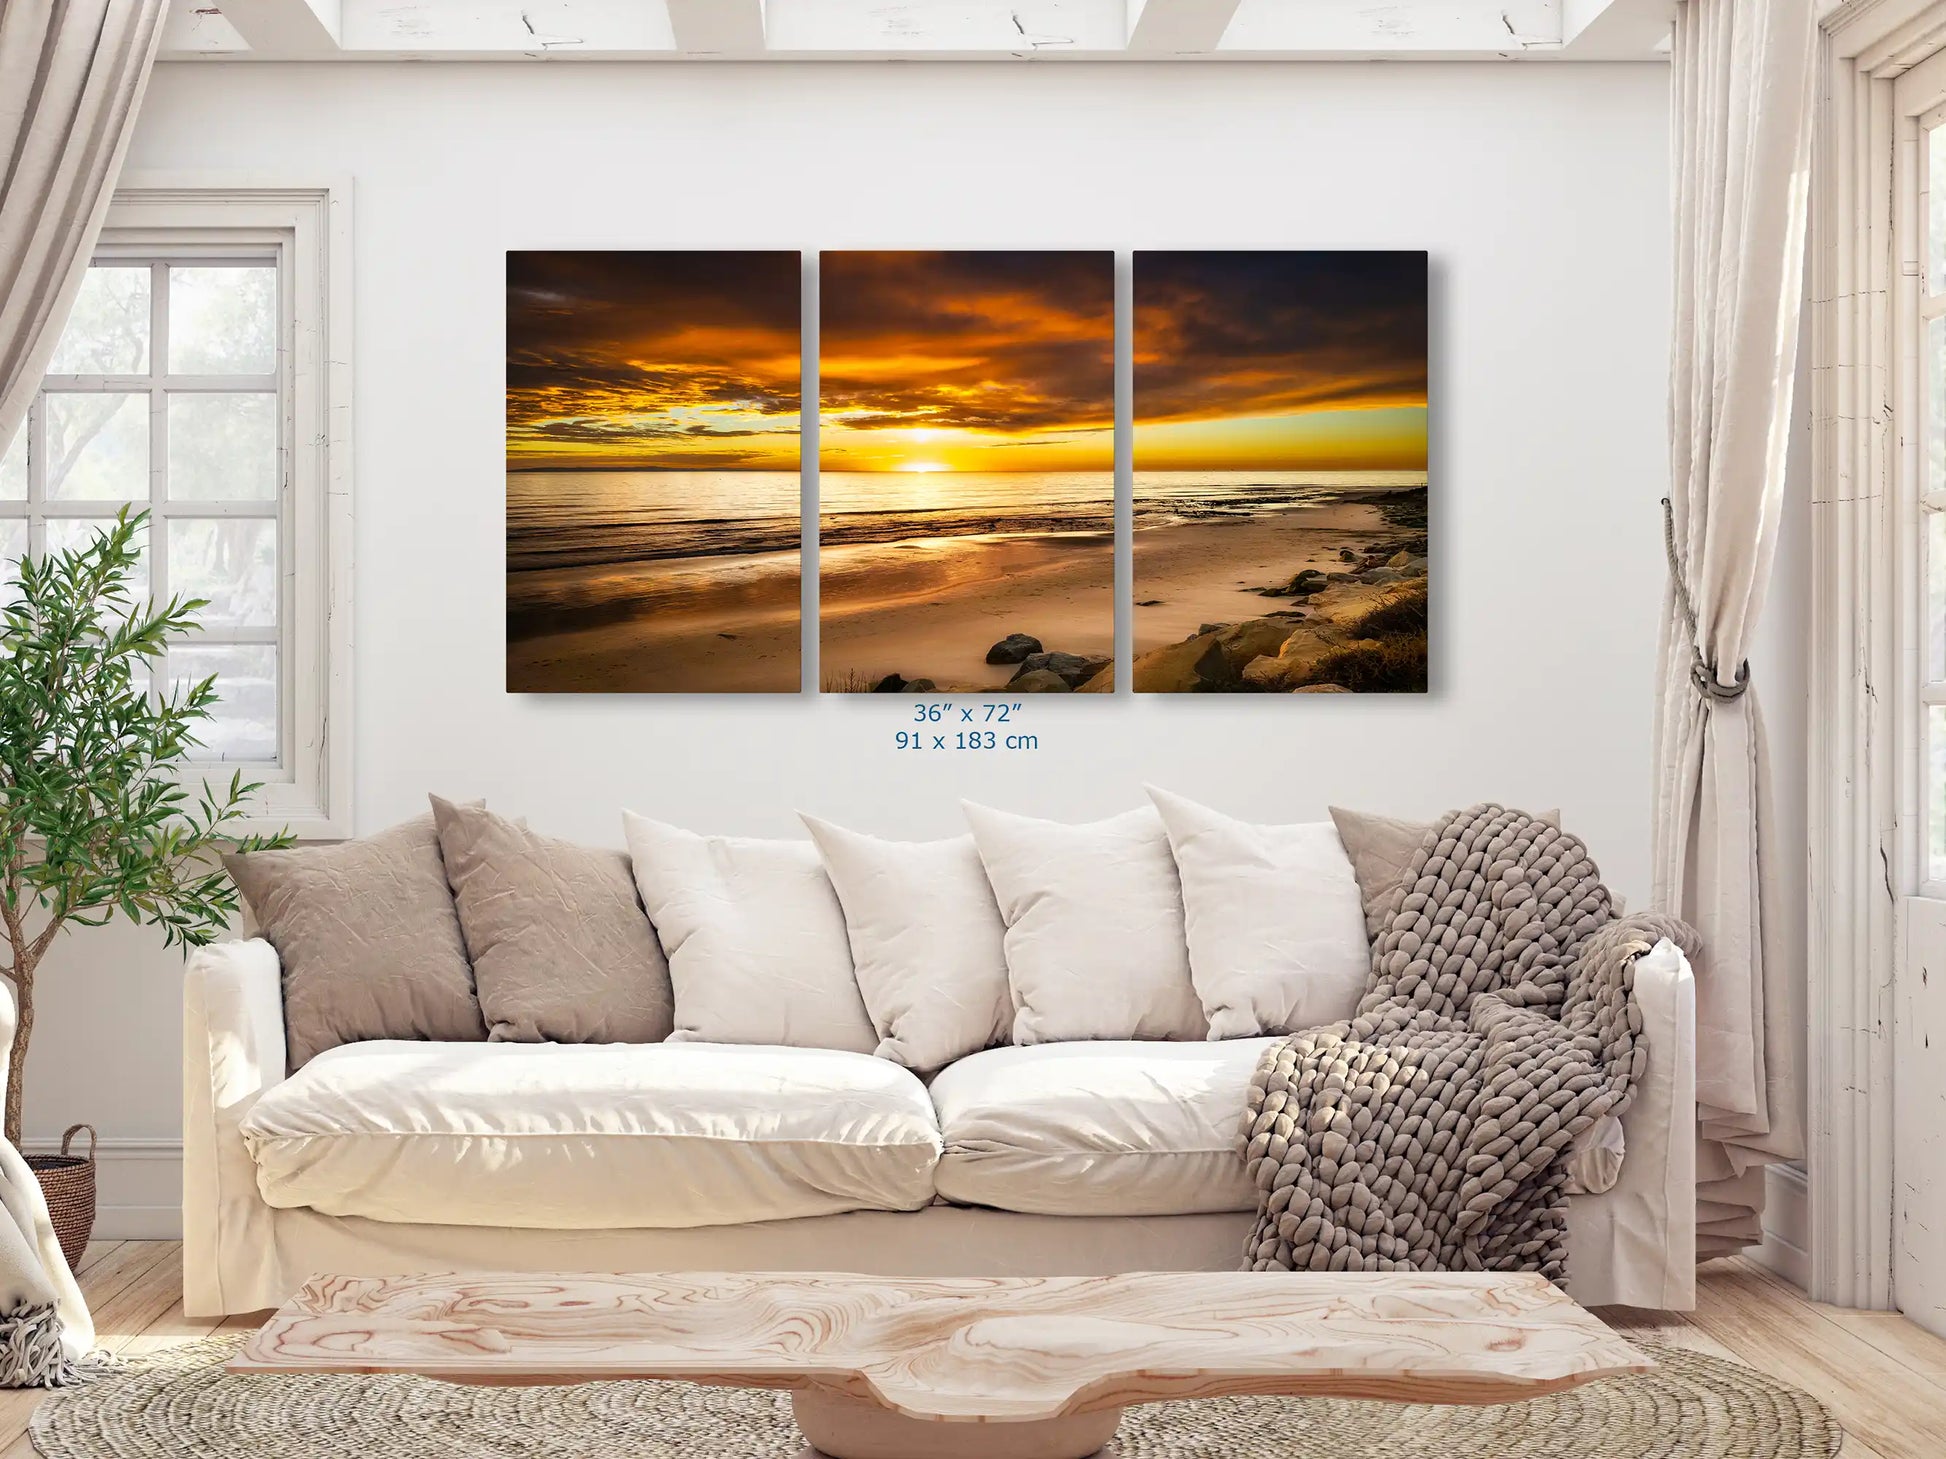 Large 36x72 wall art of Hobson Beach's sunset commands the living space with its mesmeric, vivid colors and transcendent tranquility.